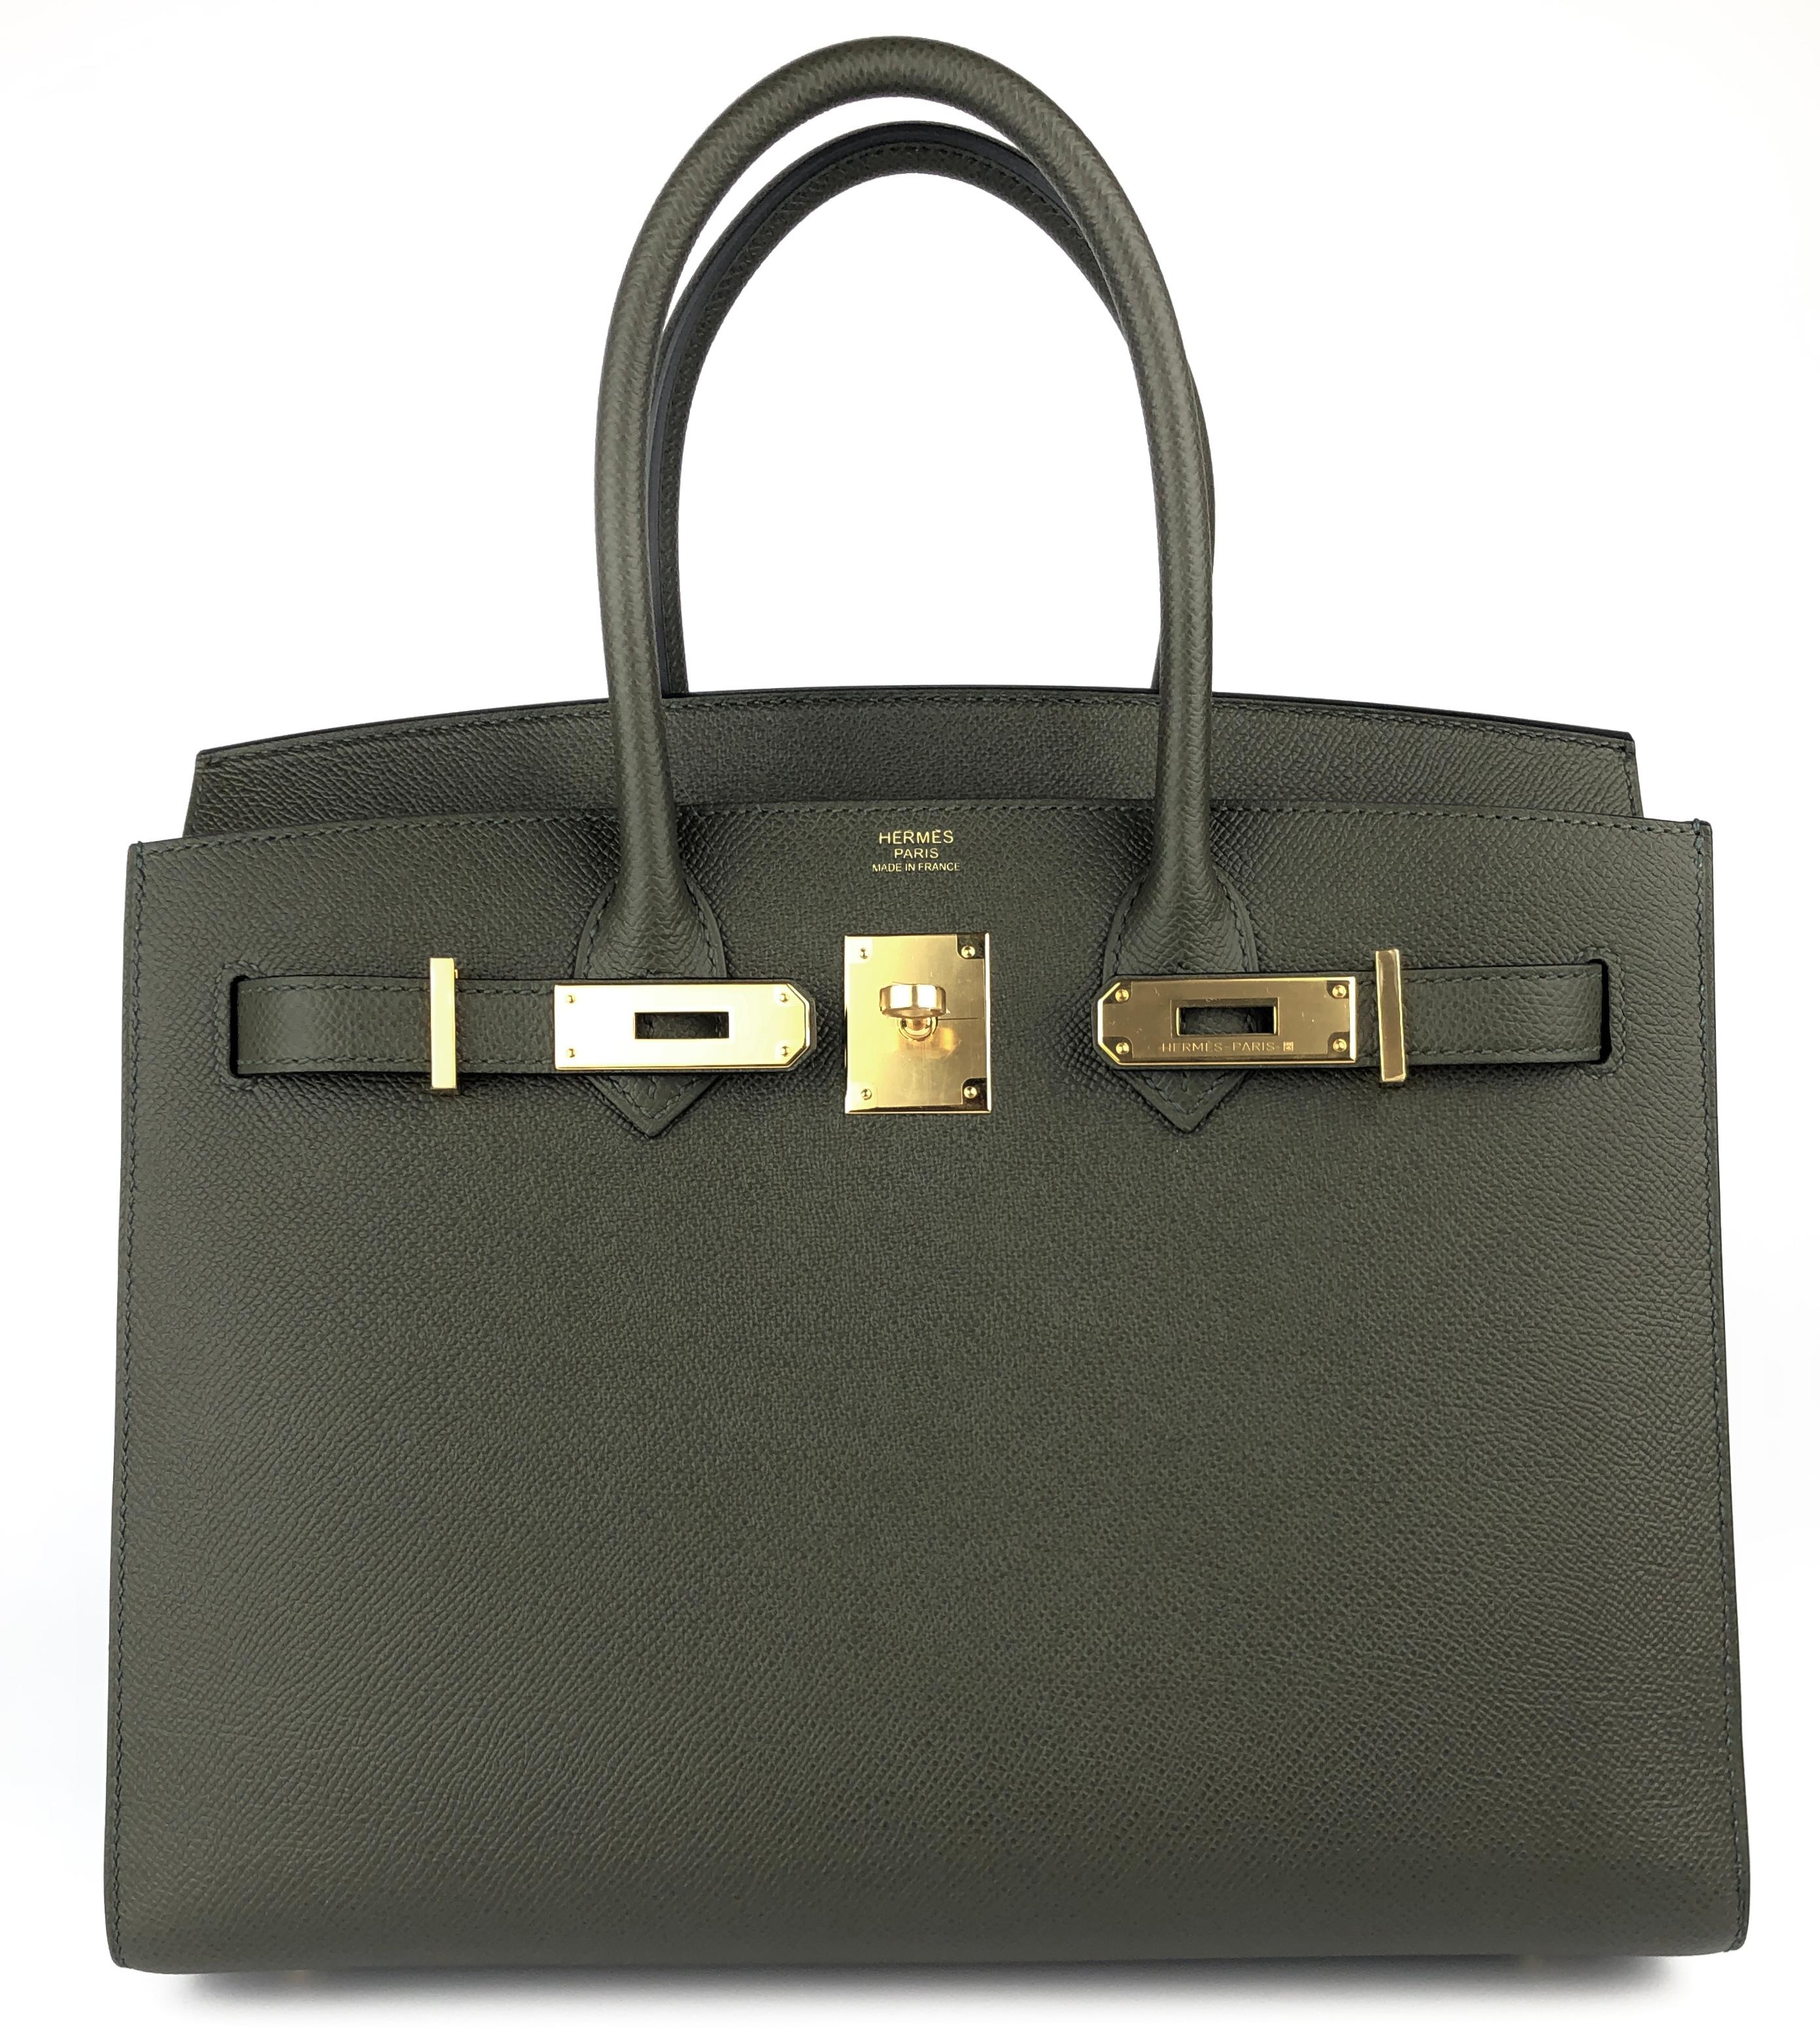 As New Absolutely Stunning Rare Limited Edition Hermes Birkin 30 Sellier Vert de Dris. Complimented by Epsom Leather and Gold Hardware. Z Stamp 2021. 

Please see Photo 10 Bag has minor marks on the bottom interior from the couchette, lock and Keys